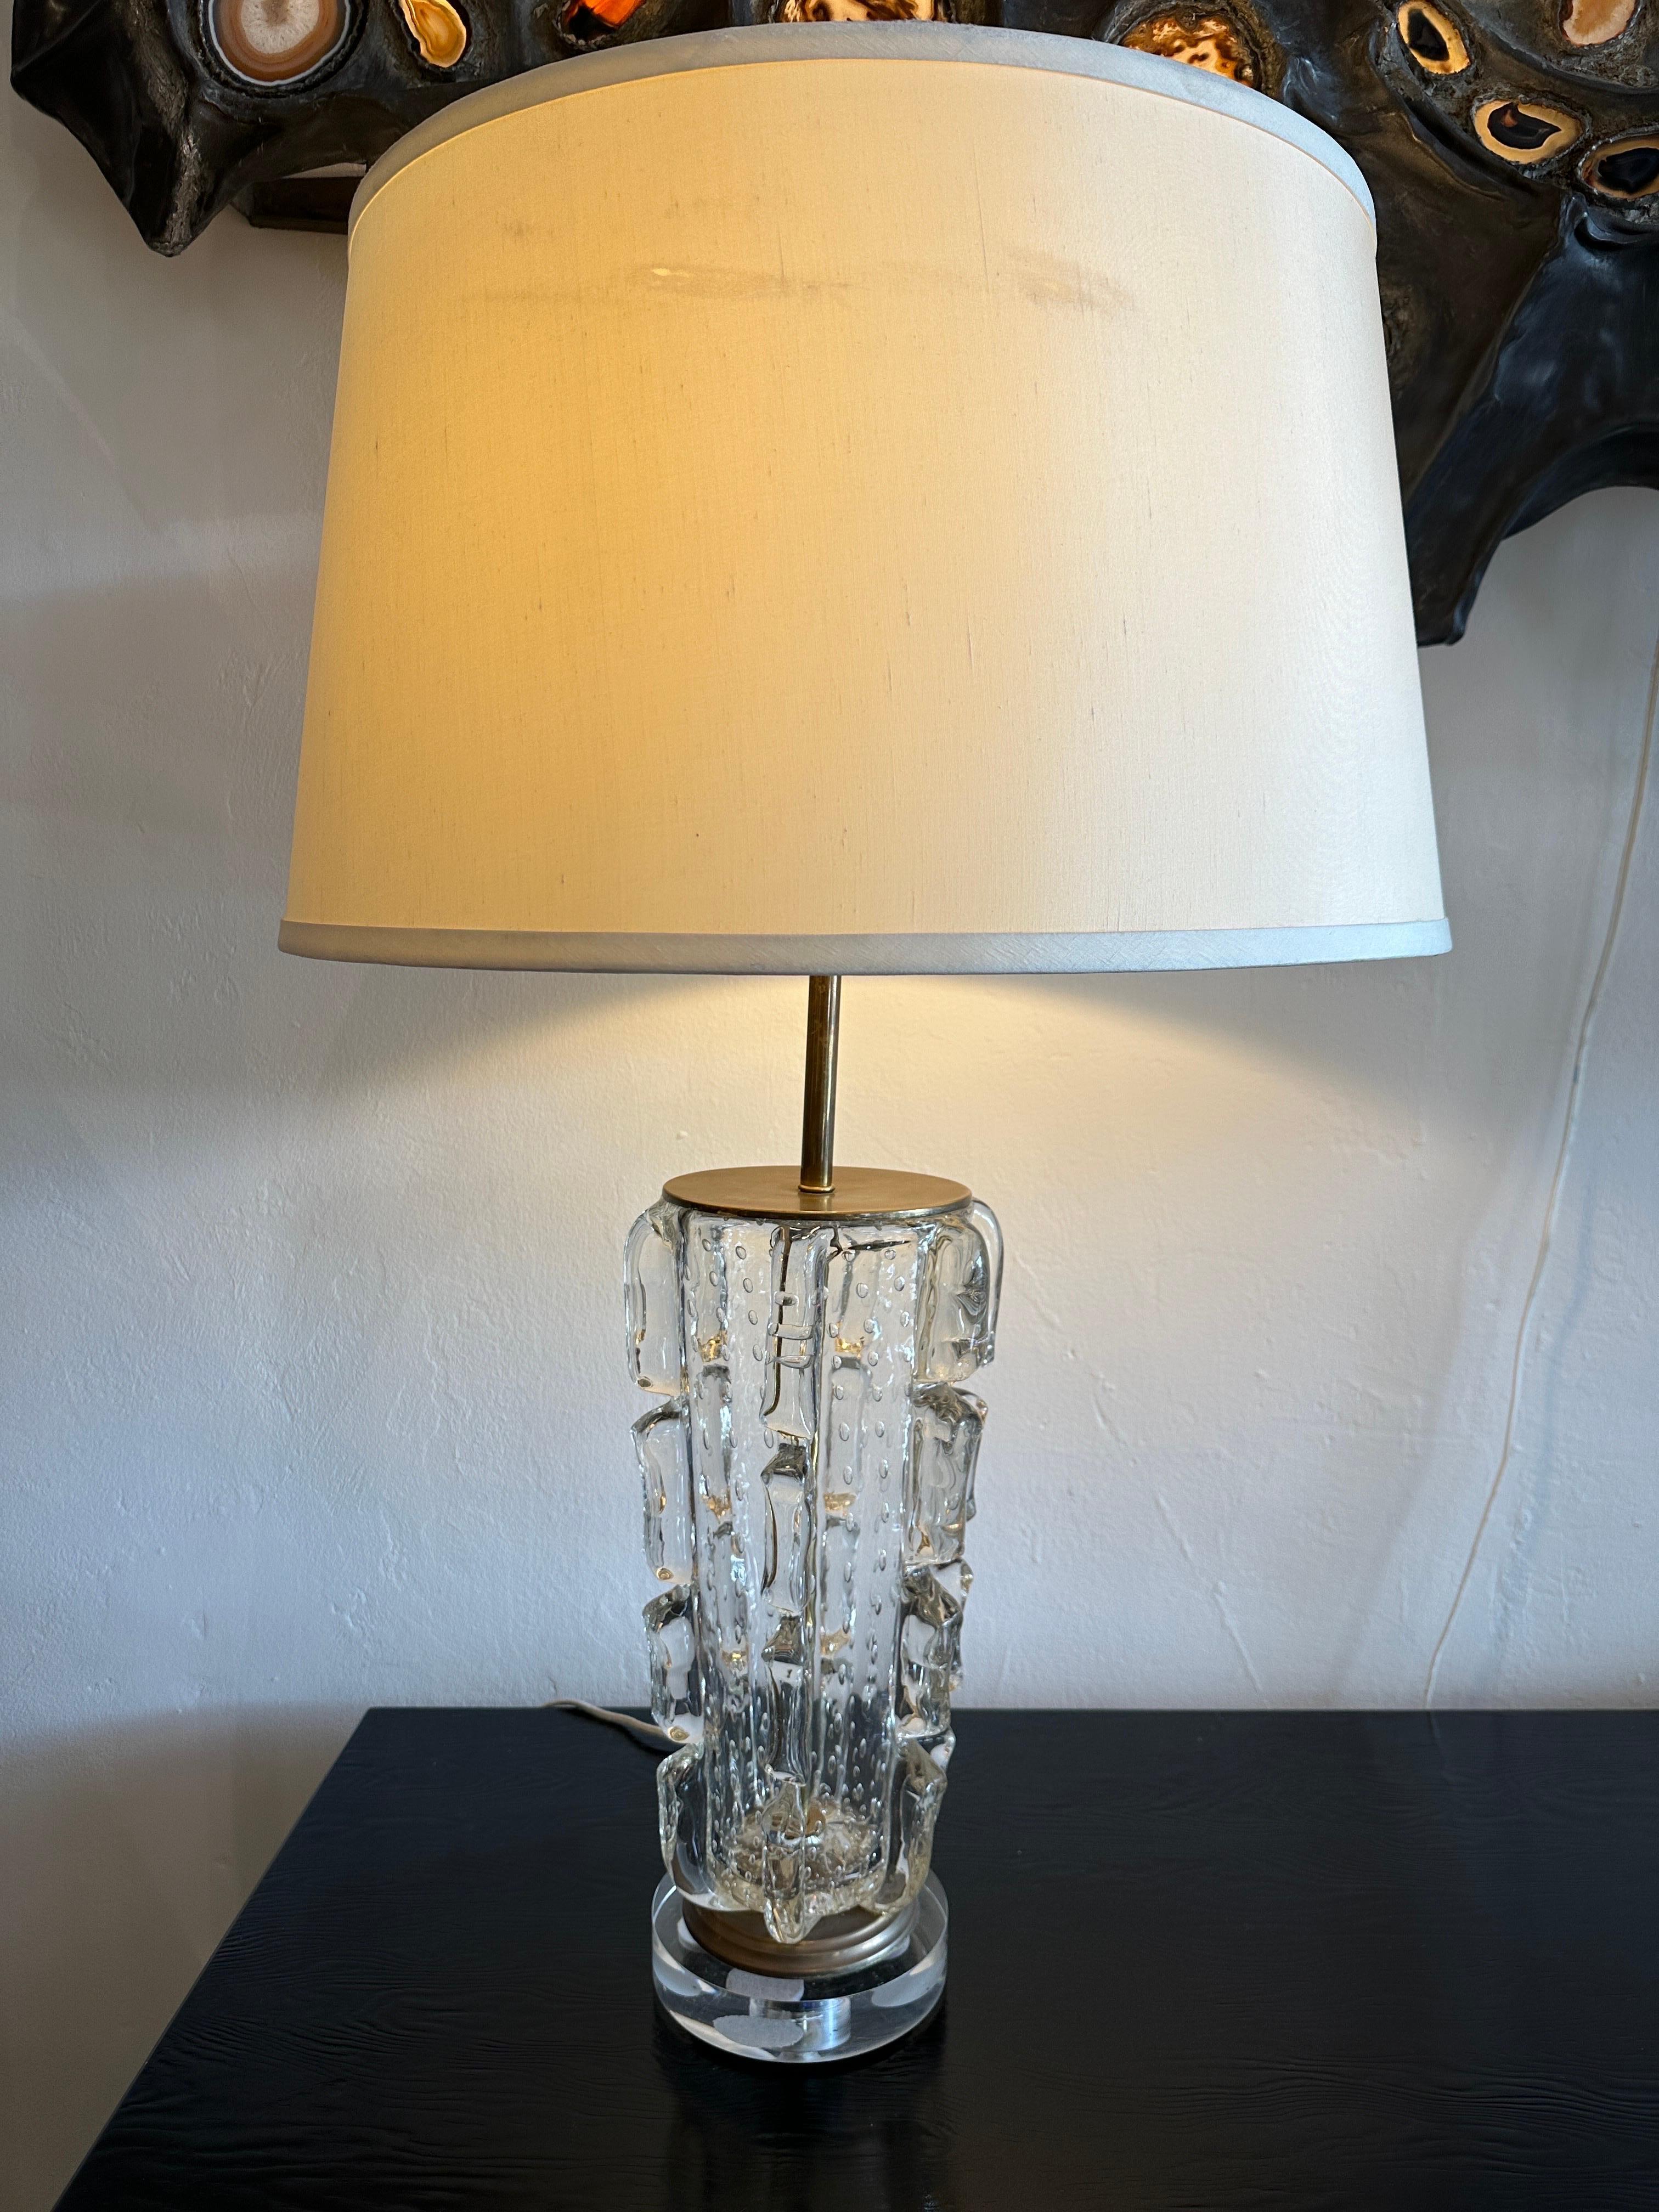 Vintage 1940's Barovier Bubbled Murano Glass Table Lamp For Sale 3